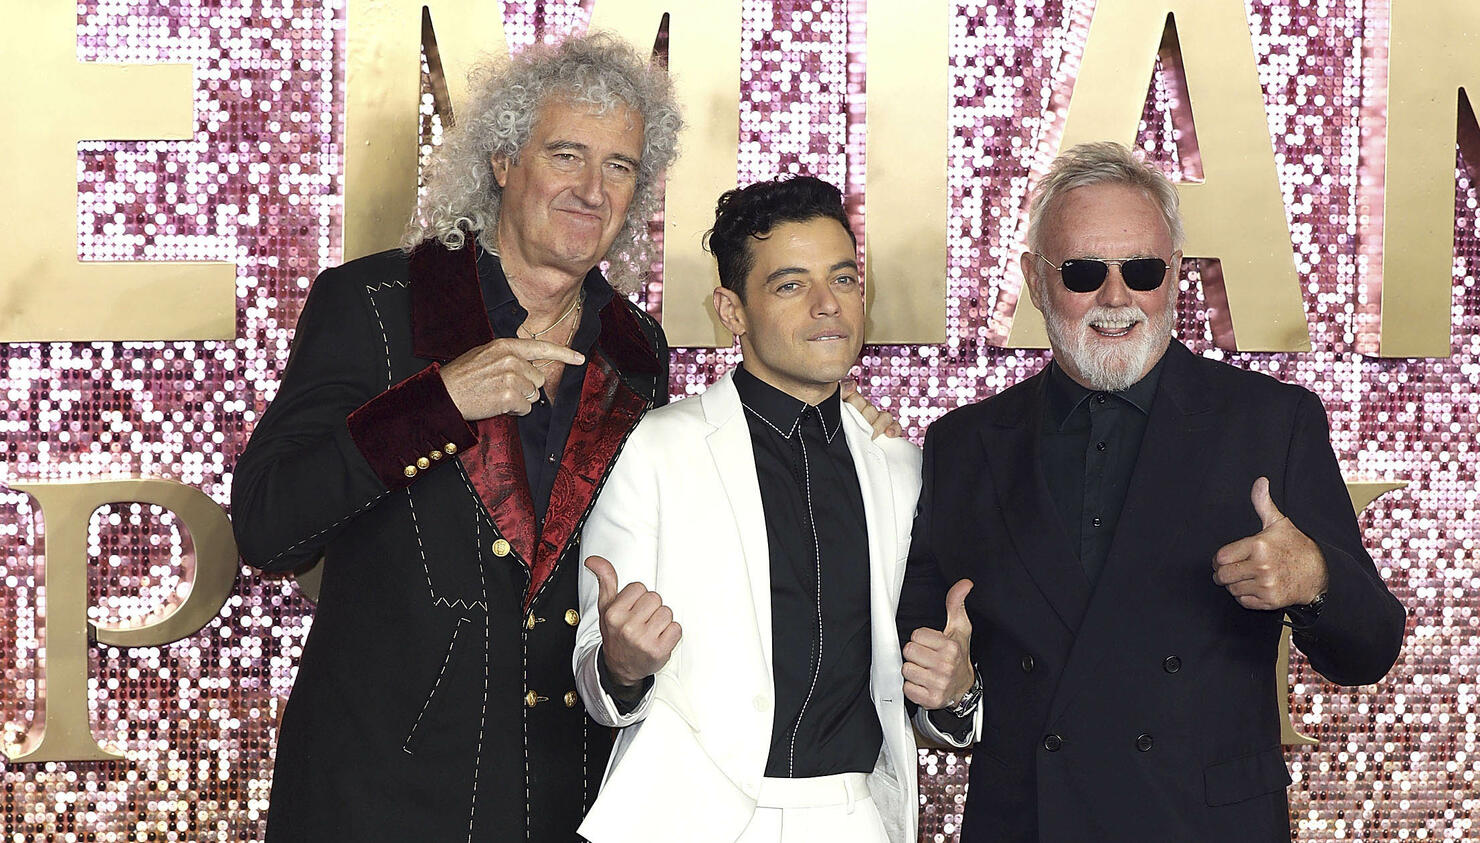 Queen's 'Bohemian Rhapsody' Has Made Over $500 Million in Theaters